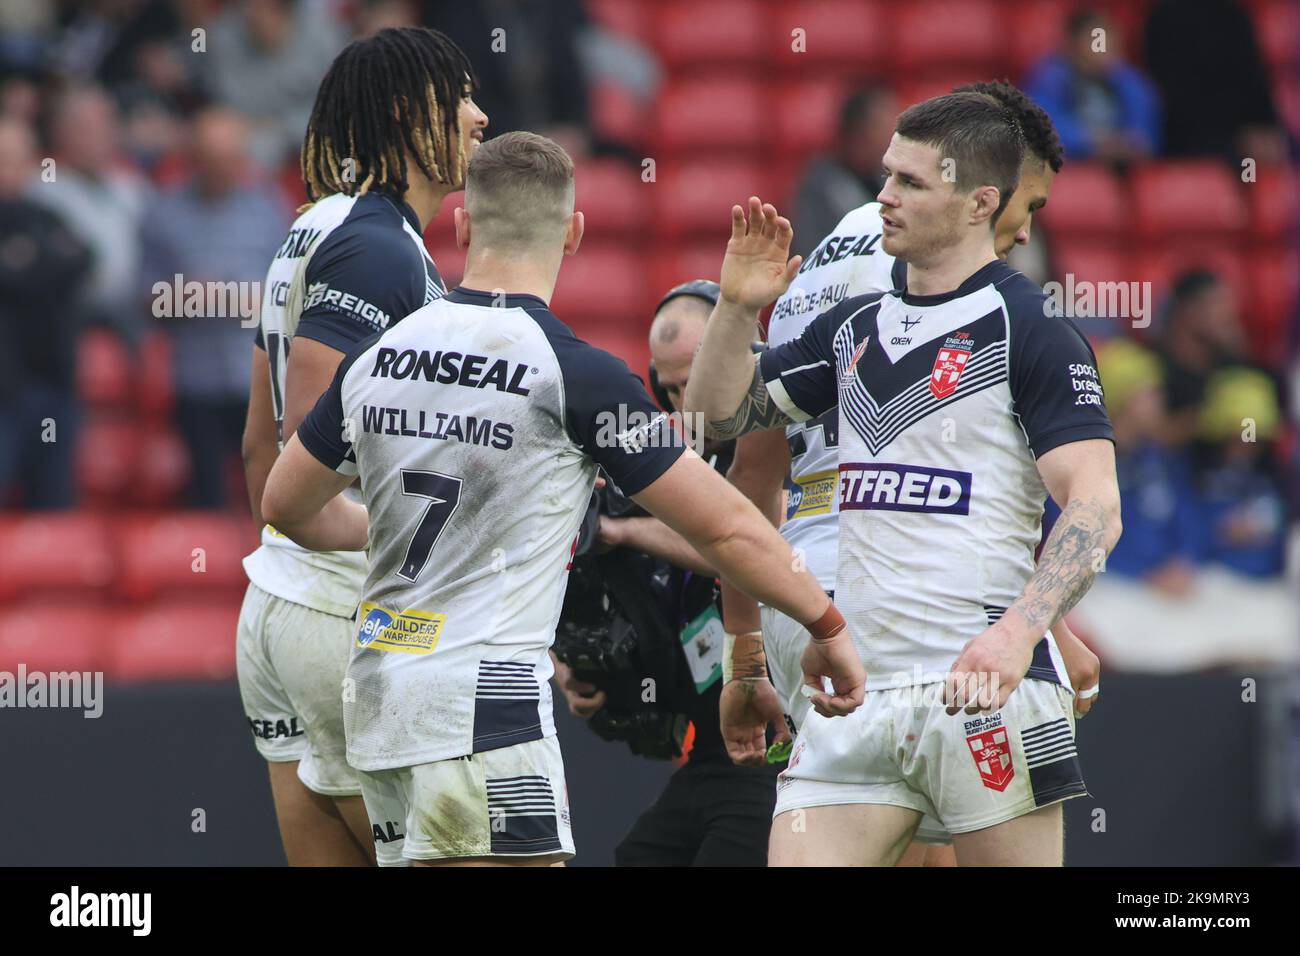 Sheffield, UK. 29th Oct, 2022. Bramall Lane, Sheffield, South Yorkshire, 29th October 2022. Rugby League 2021 World Cup England Rugby League vs Greek Rugby League Dom Young celebrates scoring his 3rd try of the game against Greece Rugby League Credit: Touchlinepics/Alamy Live News Stock Photo